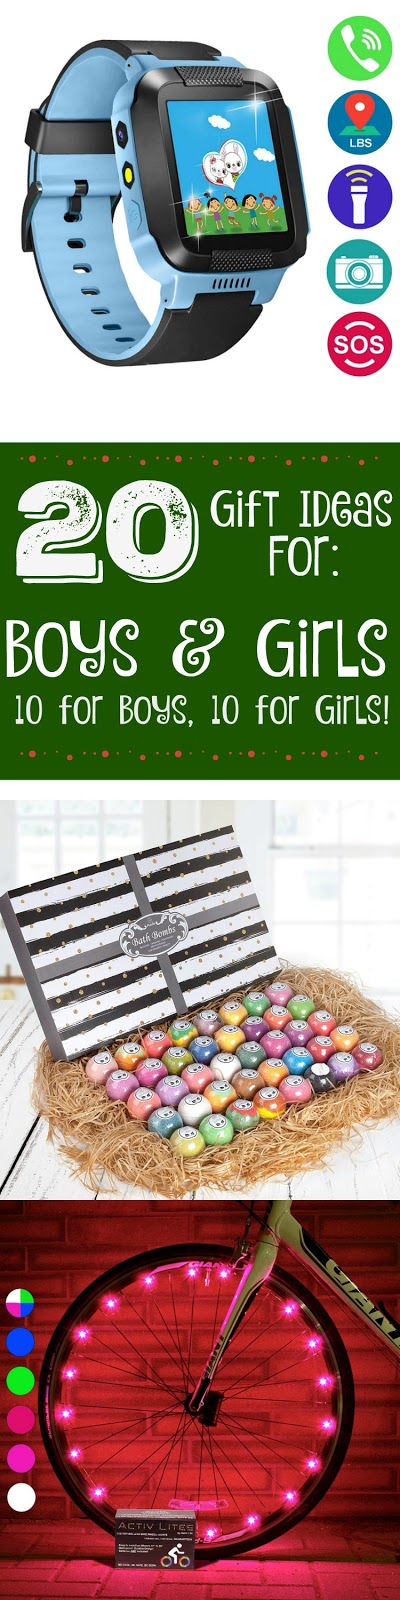 20 Holiday Gift Ideas for Boys & Girls...hand-picked Christmas gifts, 10 for boys and 10 for girls!  Eveyrthing from electronics to educational toys to crafts to beauty items. (sweetandsavoryfood.com)